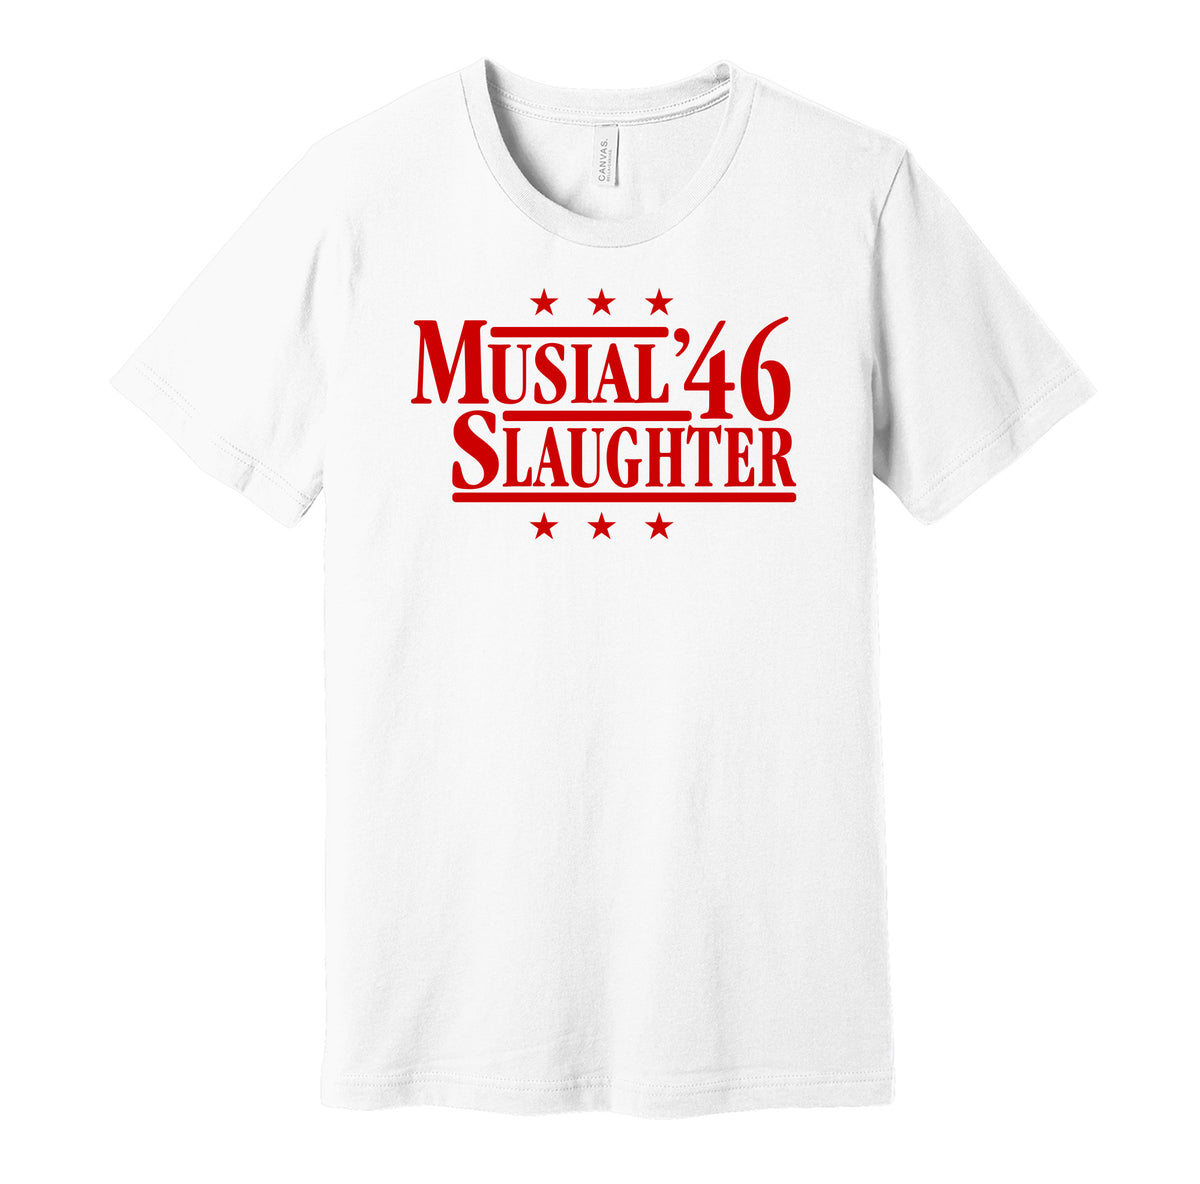 Musial & Slaughter '46 - St. Louis Baseball Legends Political Campaign Parody T-Shirt - Hyper Than Hype Shirts L / Red Shirt